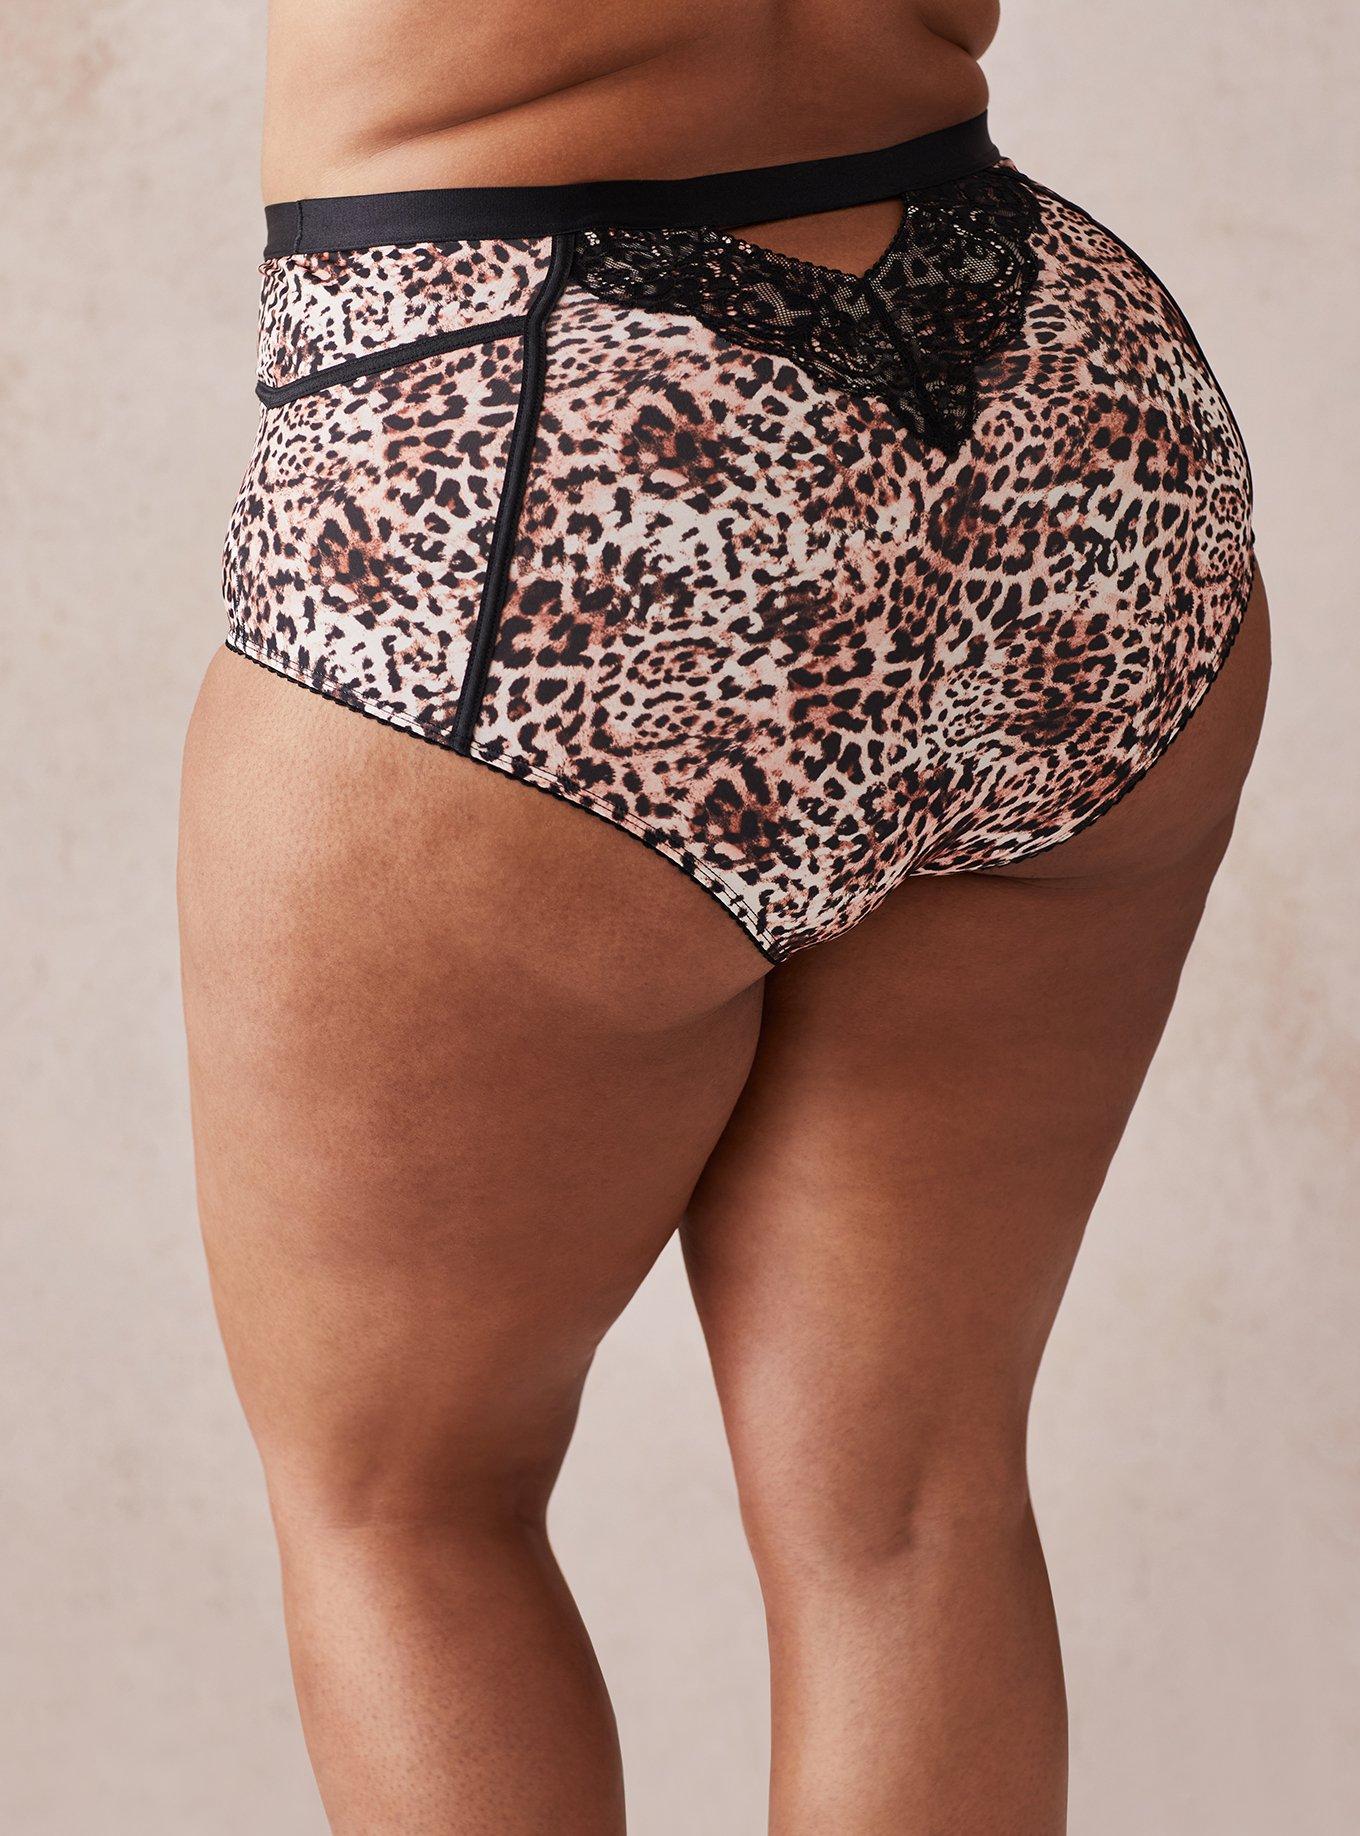 Plus Size - Microfiber High Waist Cheeky Panty With Lace Piecing - Torrid